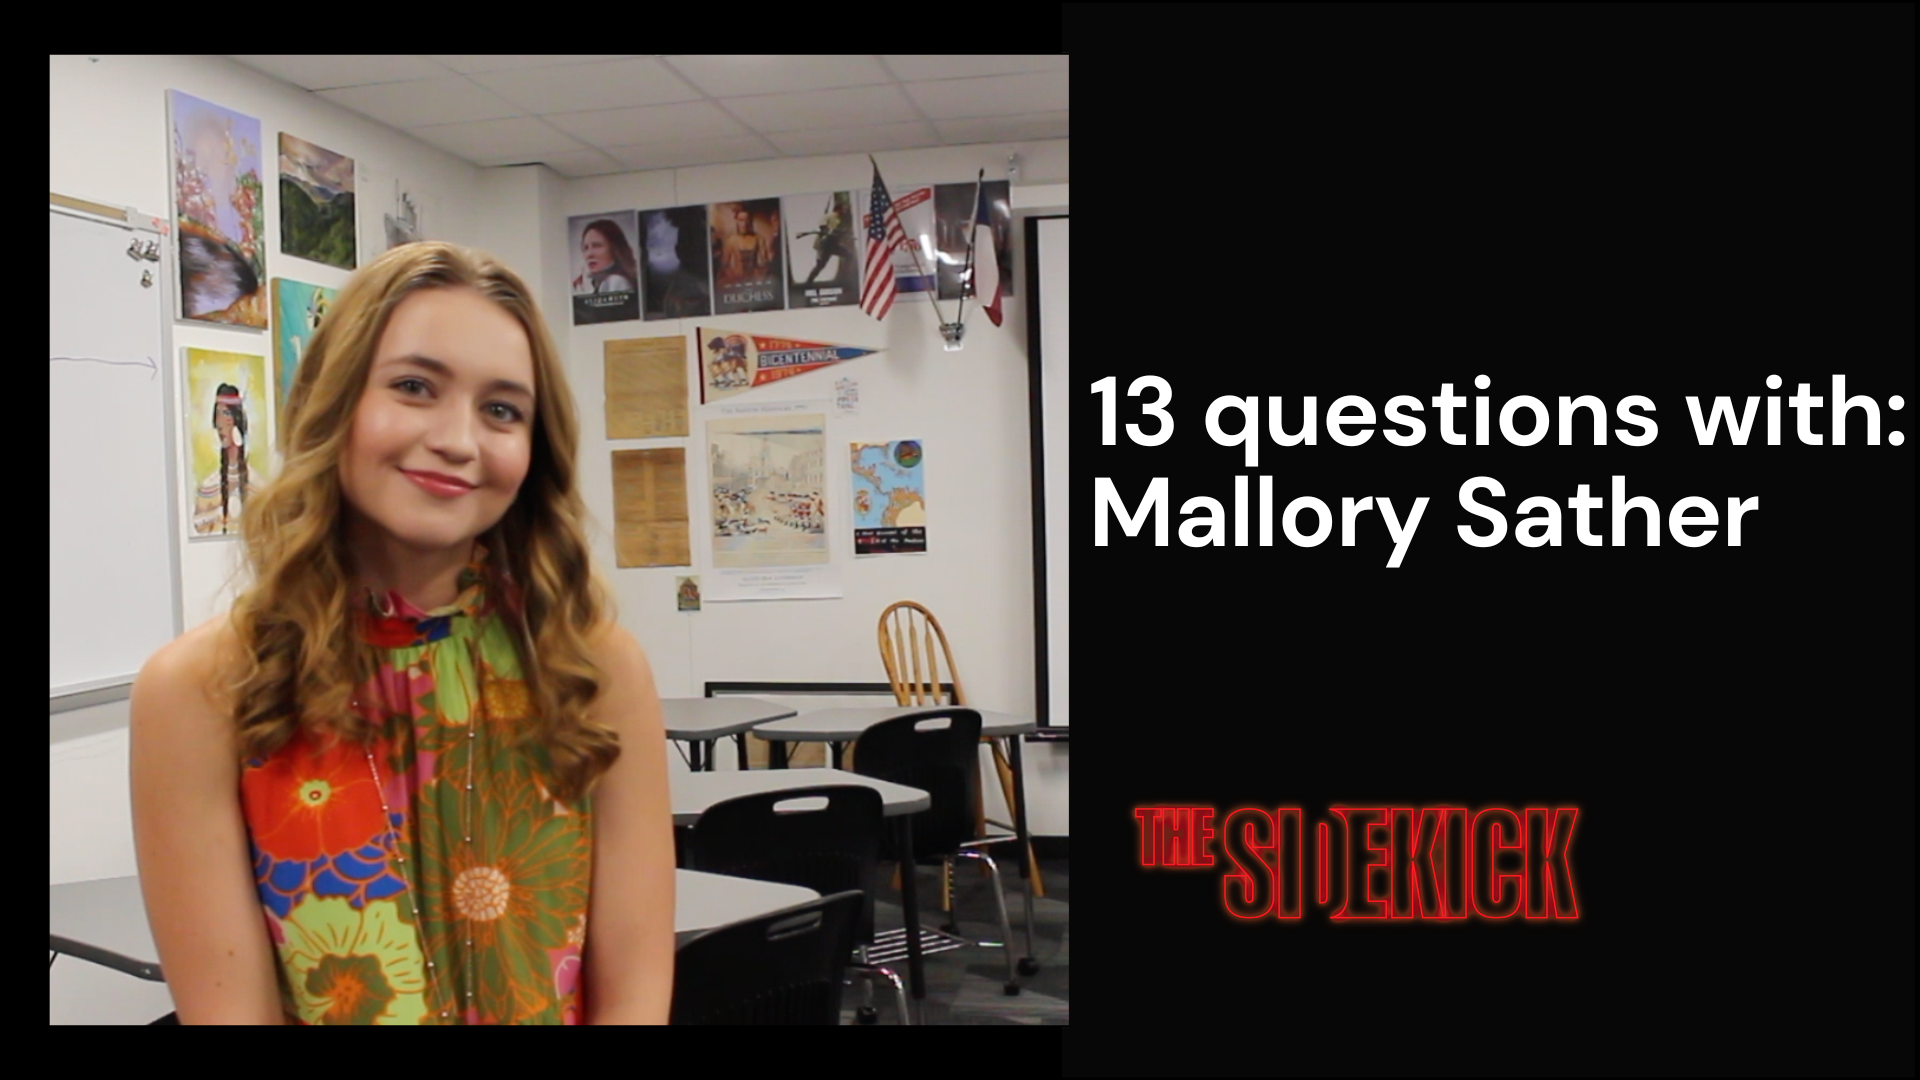 13 questions with: Mallory Sather